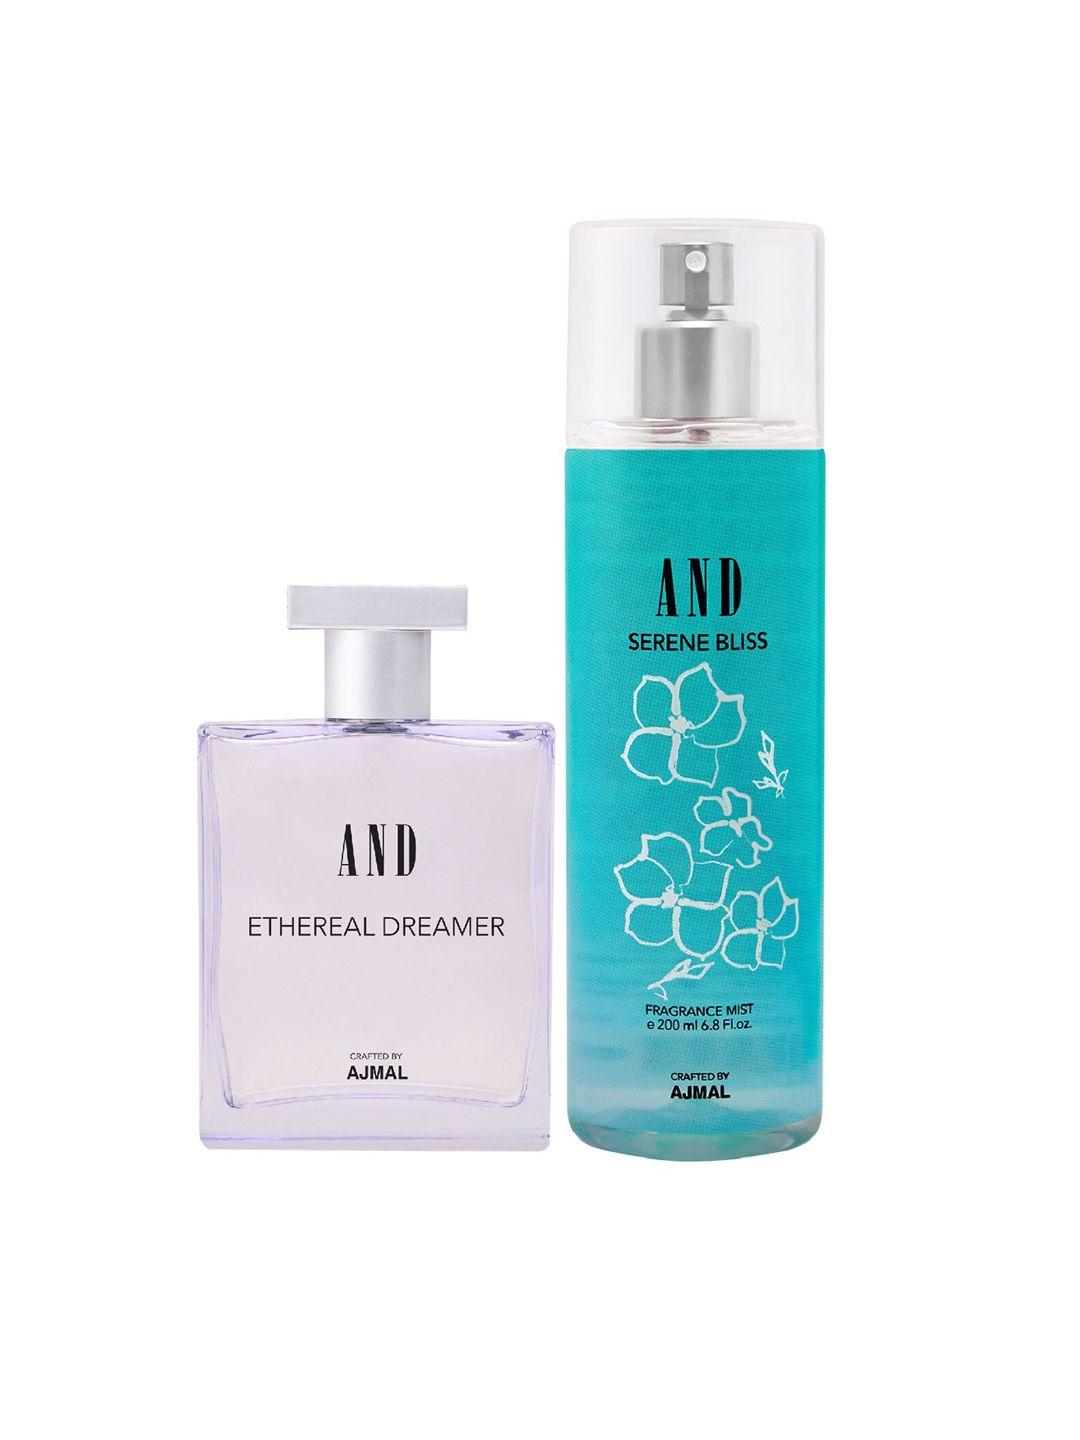 and women pack of 2 ethereal dreamer edp & serene bliss fragrance mist crafted by ajmal